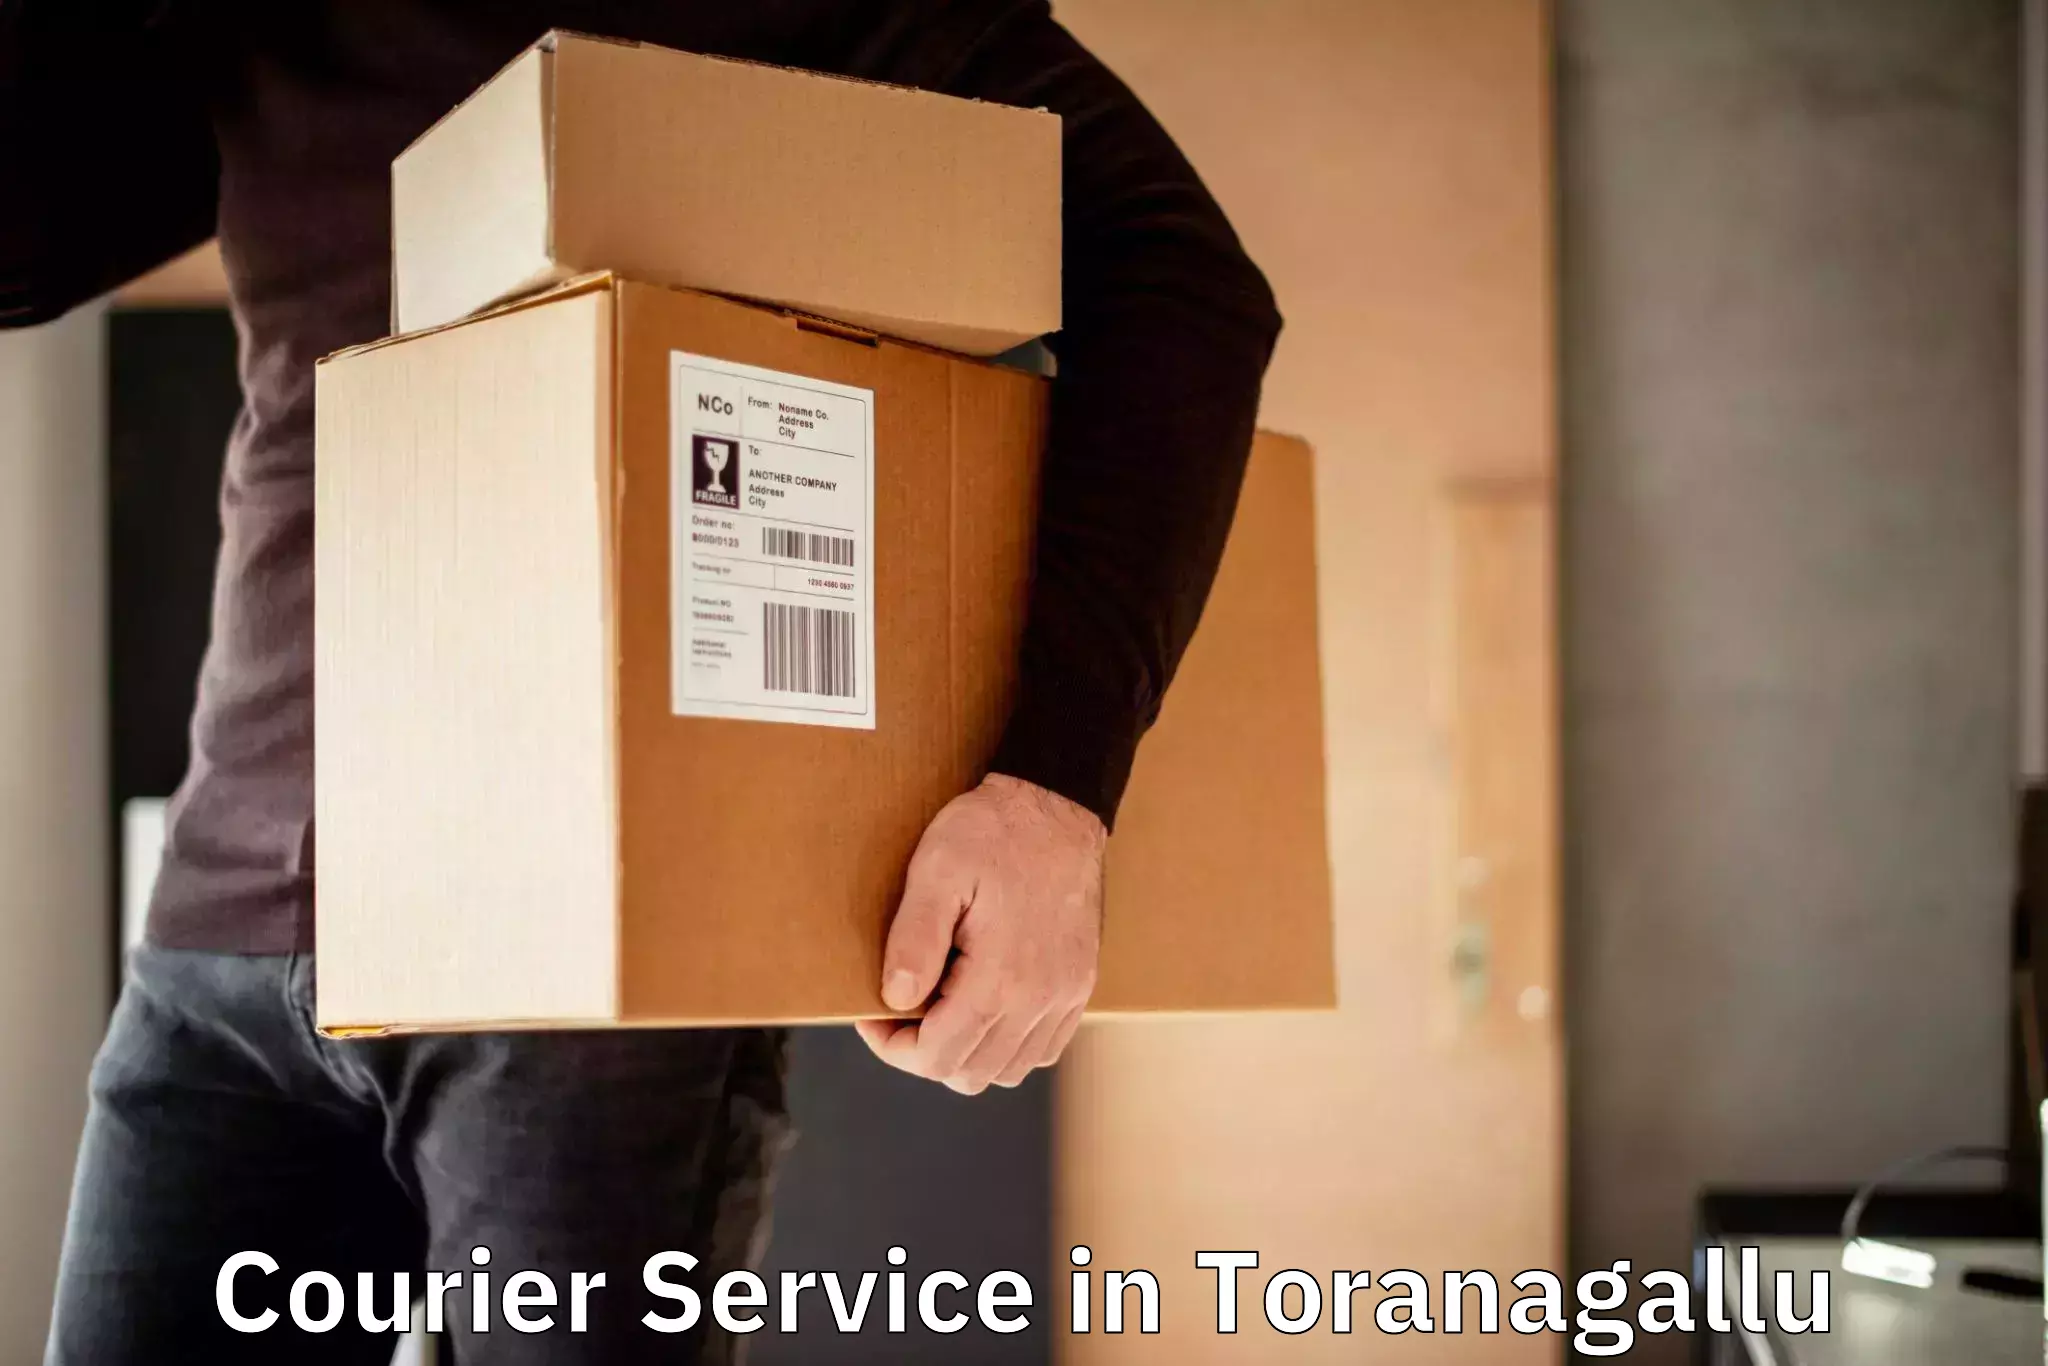 Same-day delivery solutions in Toranagallu